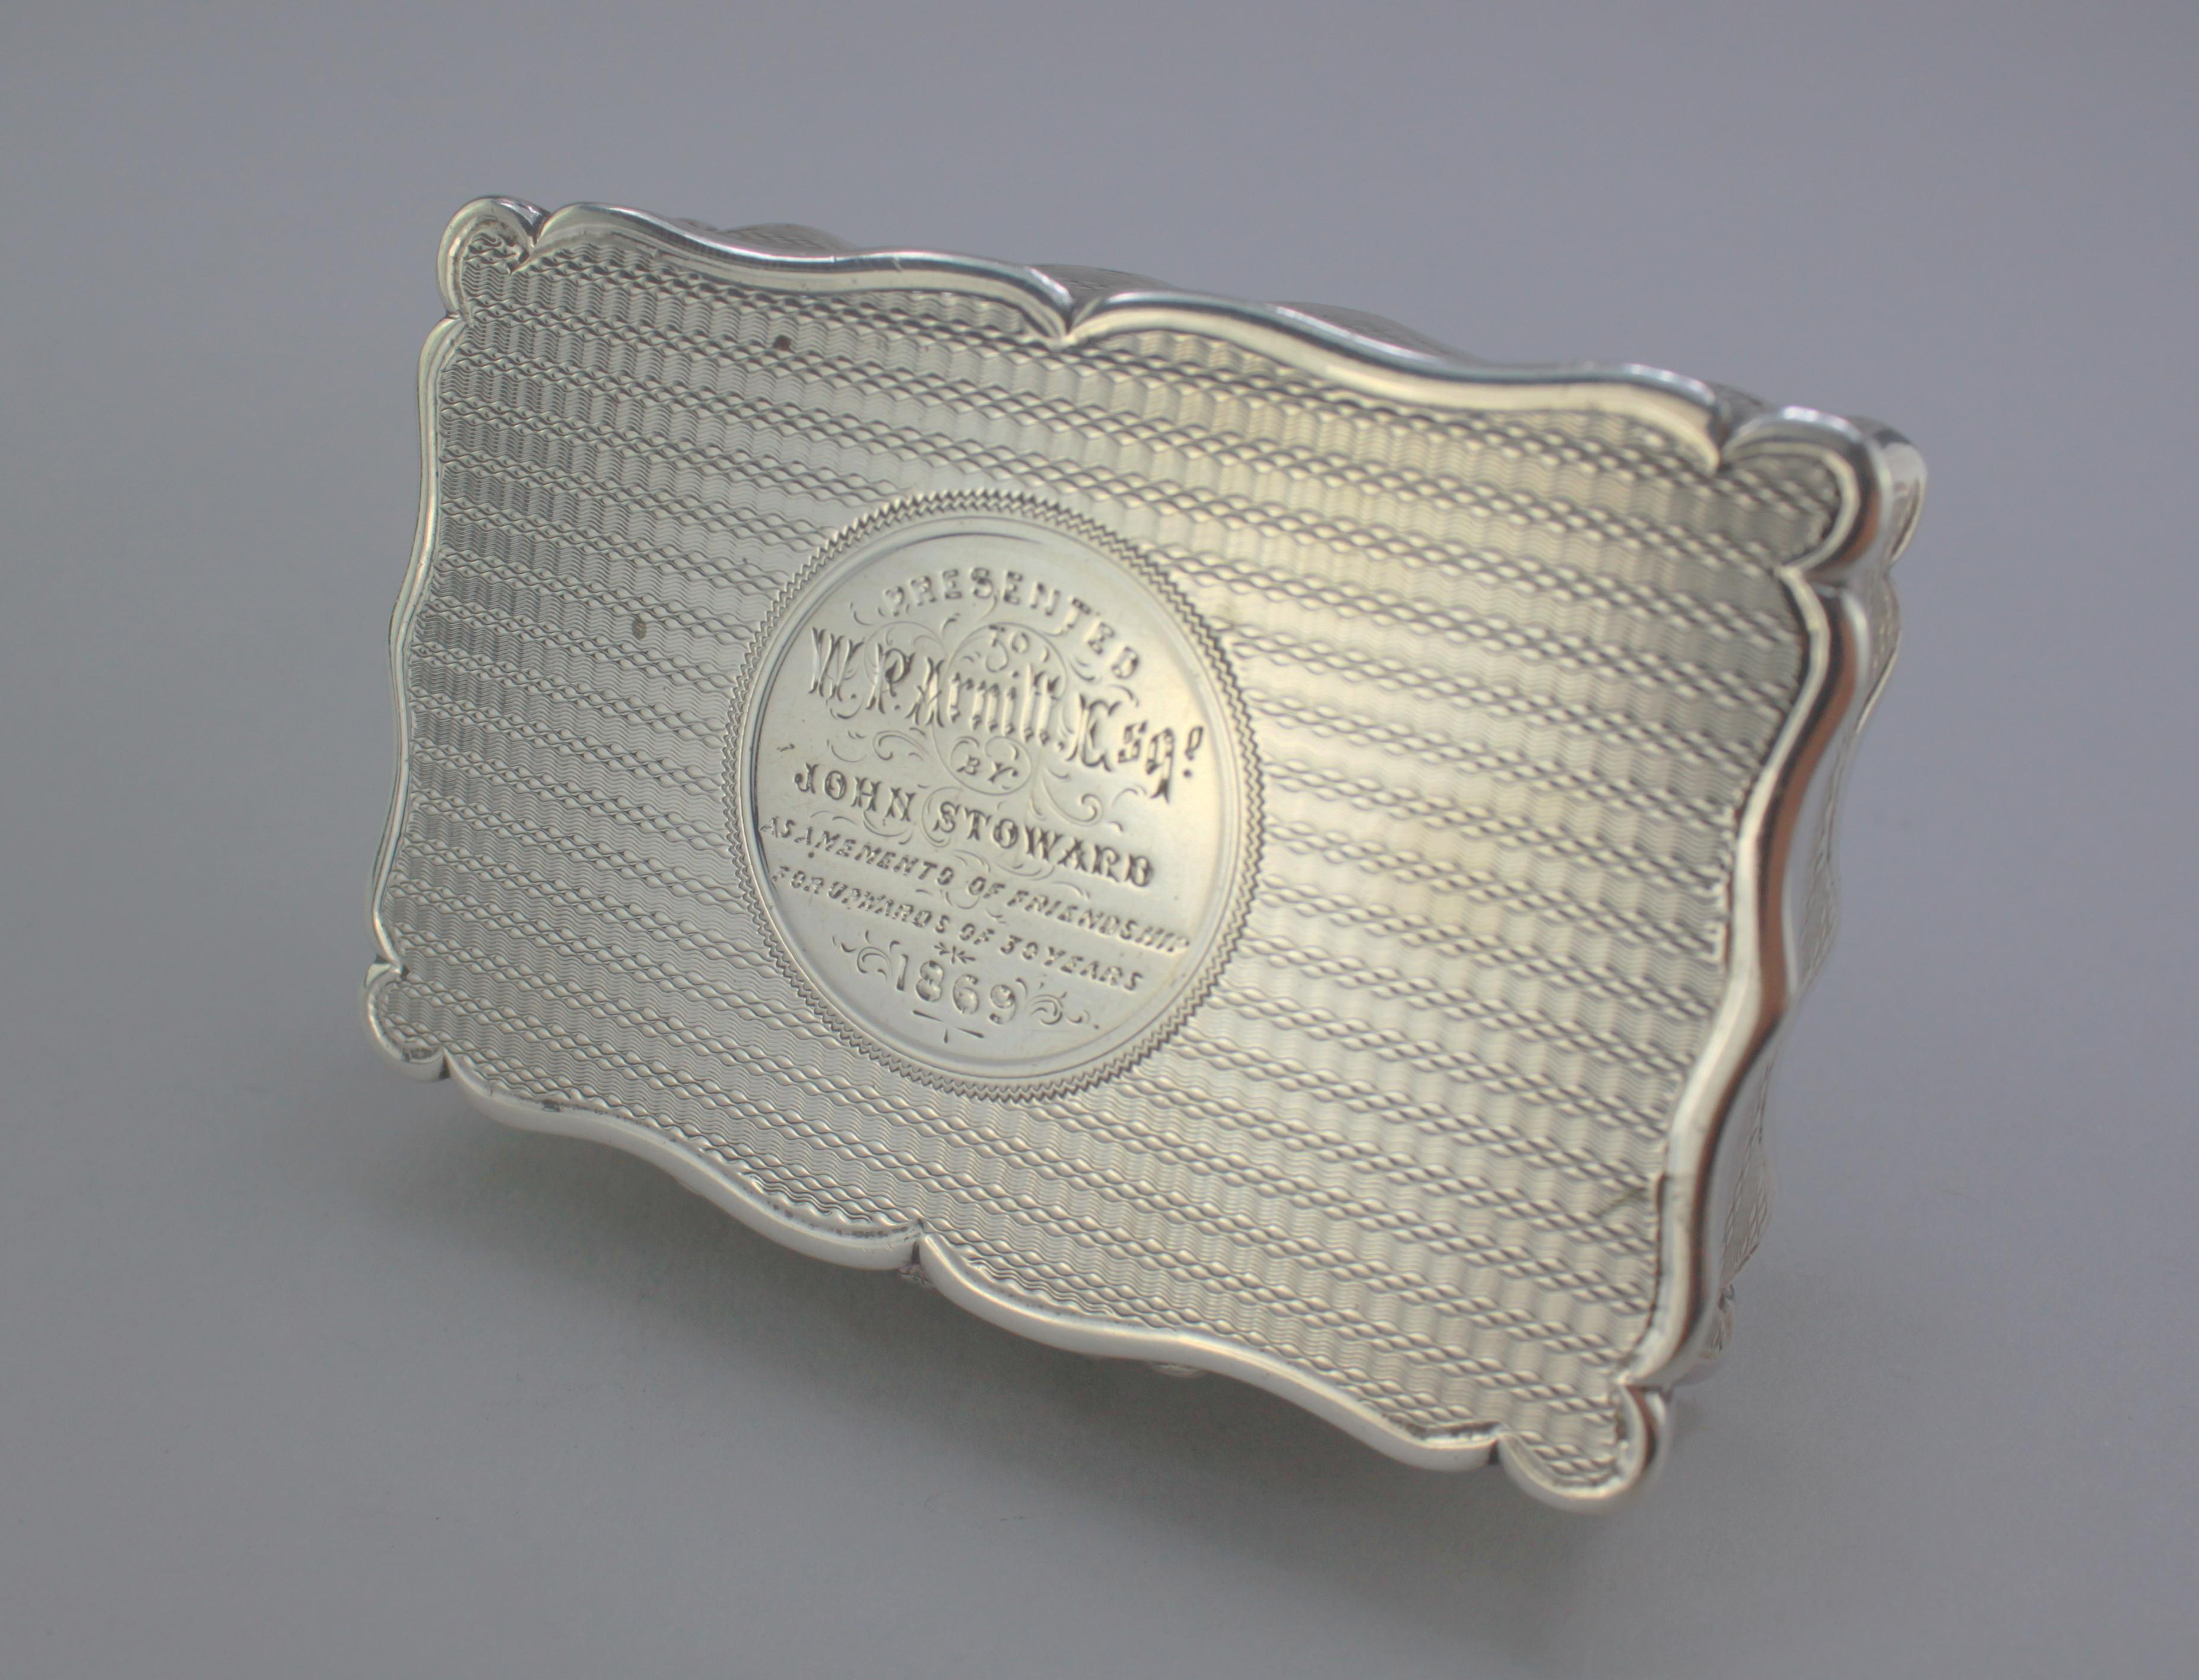 Antique Victorian sterling silver commemorative snuff box
Maker: Robert Thornton
Made in Birmingham 1868
Fully hallmarked.

Engraved on the lid of the box 

